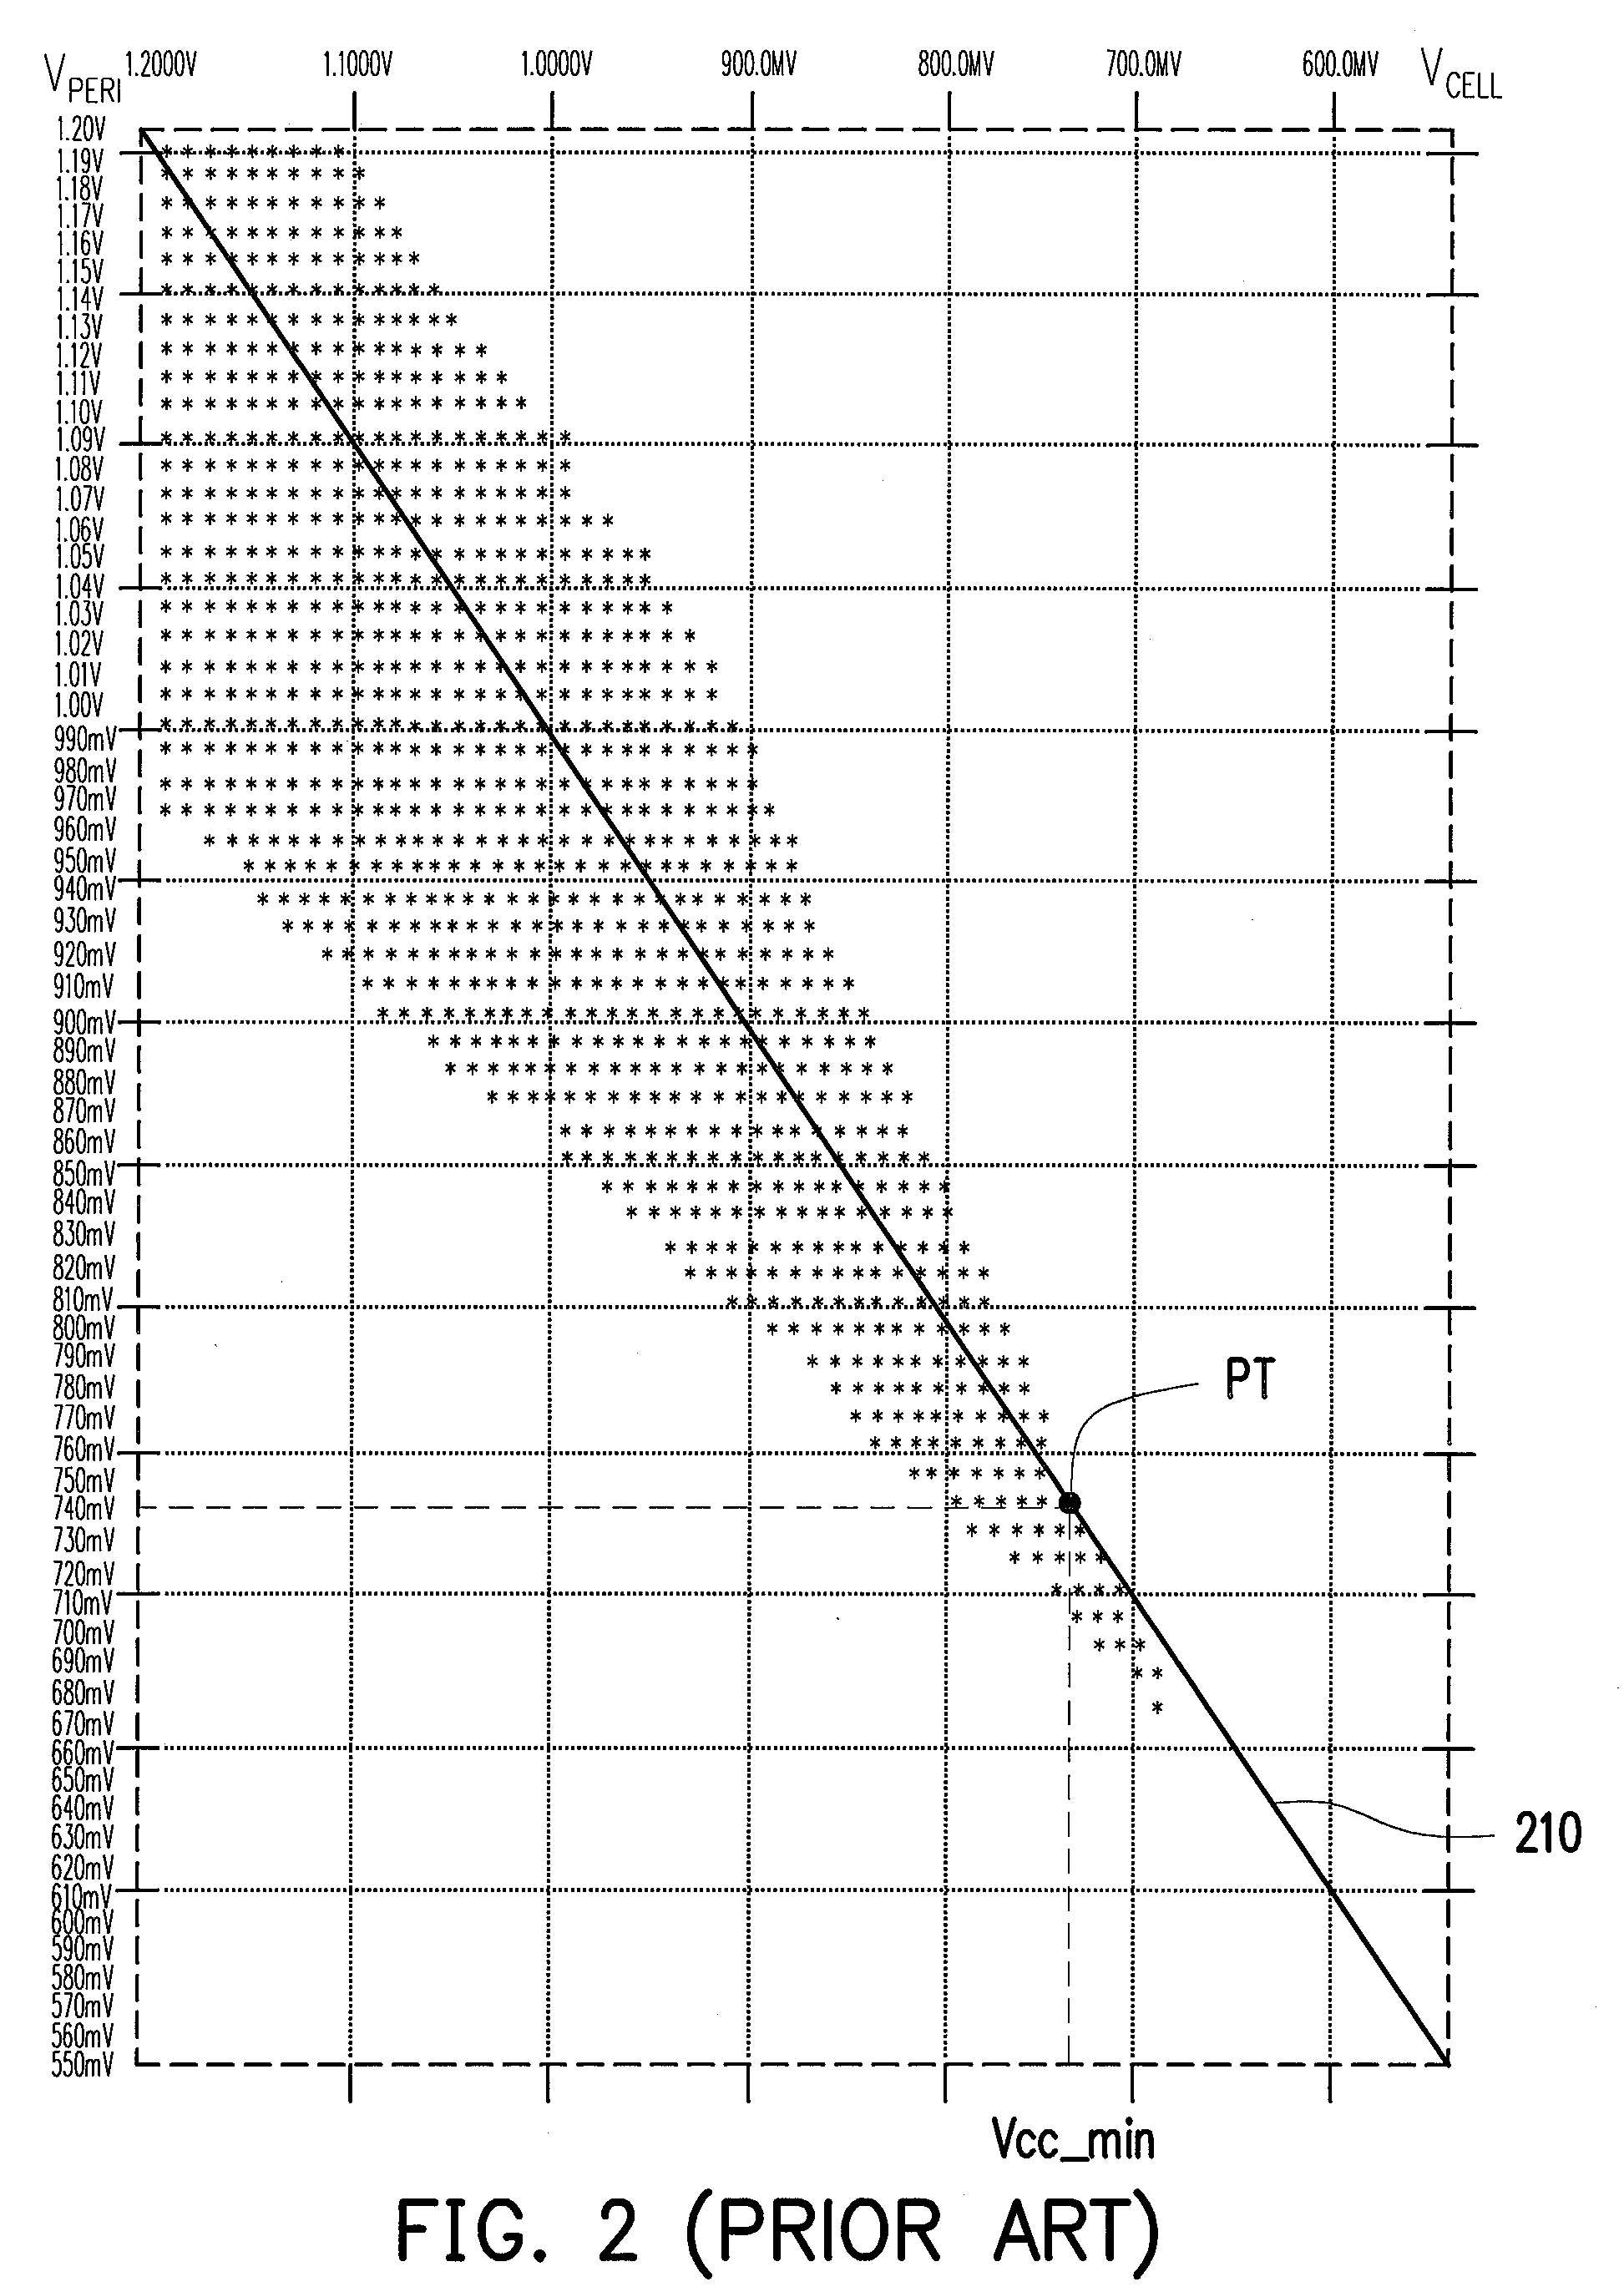 Operating voltage tuning method for static random access memory